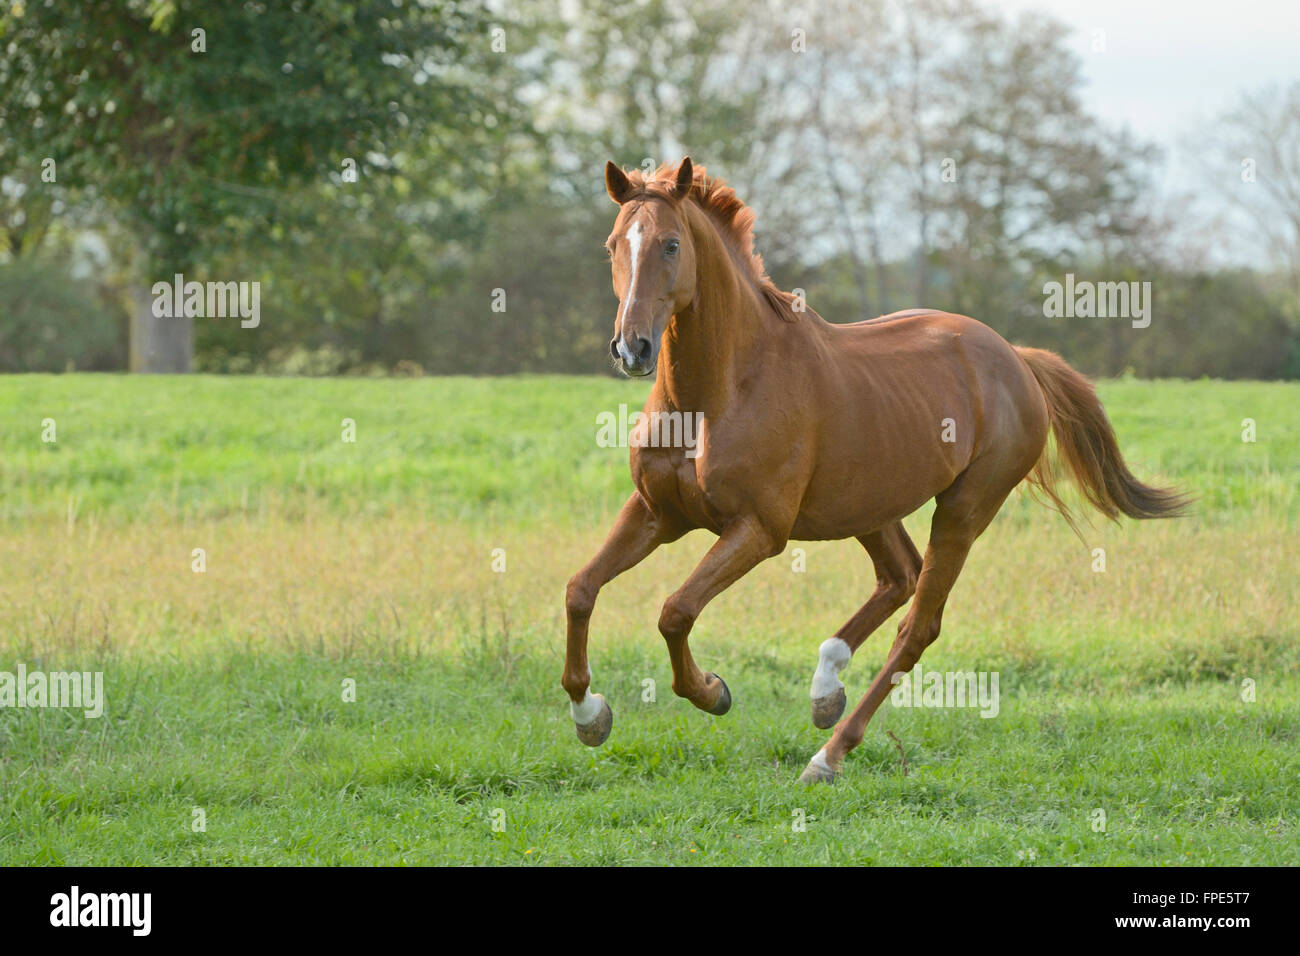 Trakehnen horse galloping in the field Stock Photo